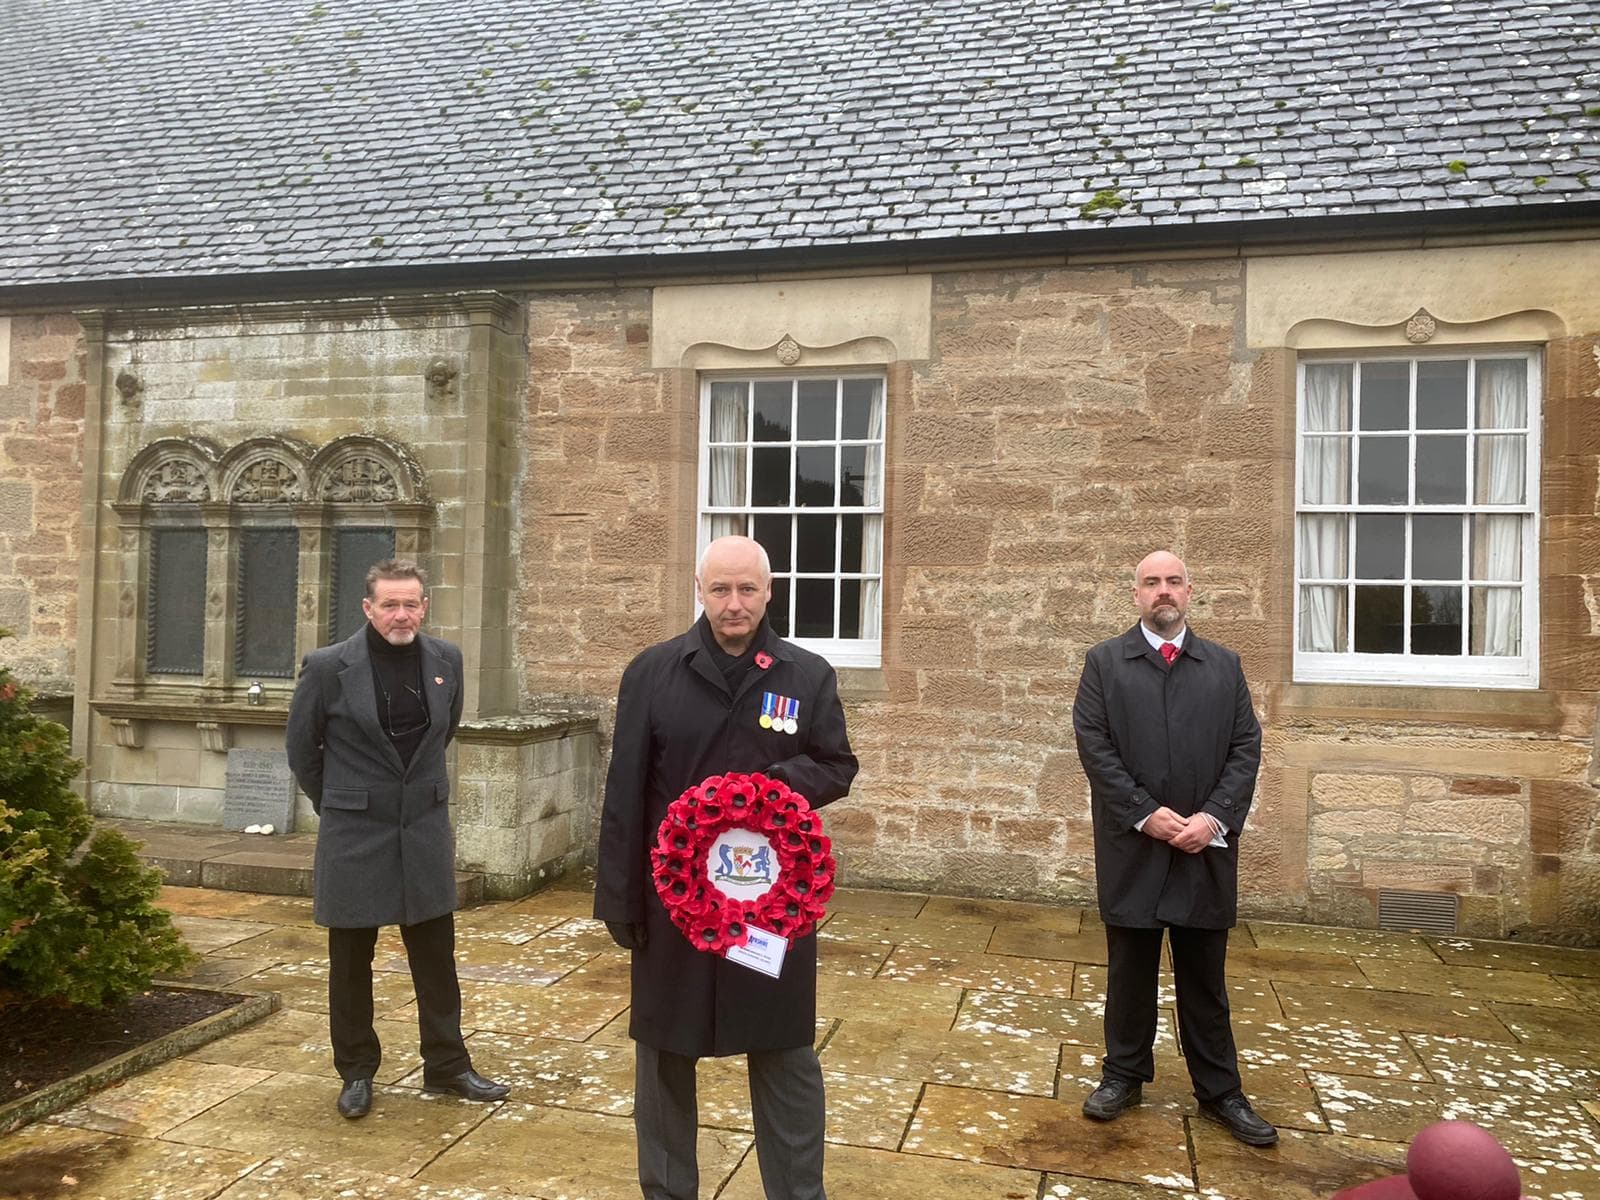 Cllrs Derek McCabe, Martin Dowey, and Lee Lyons laying a wreath to commemorate Commonwealth soldiers for Rememberance Sunday in Alloway.